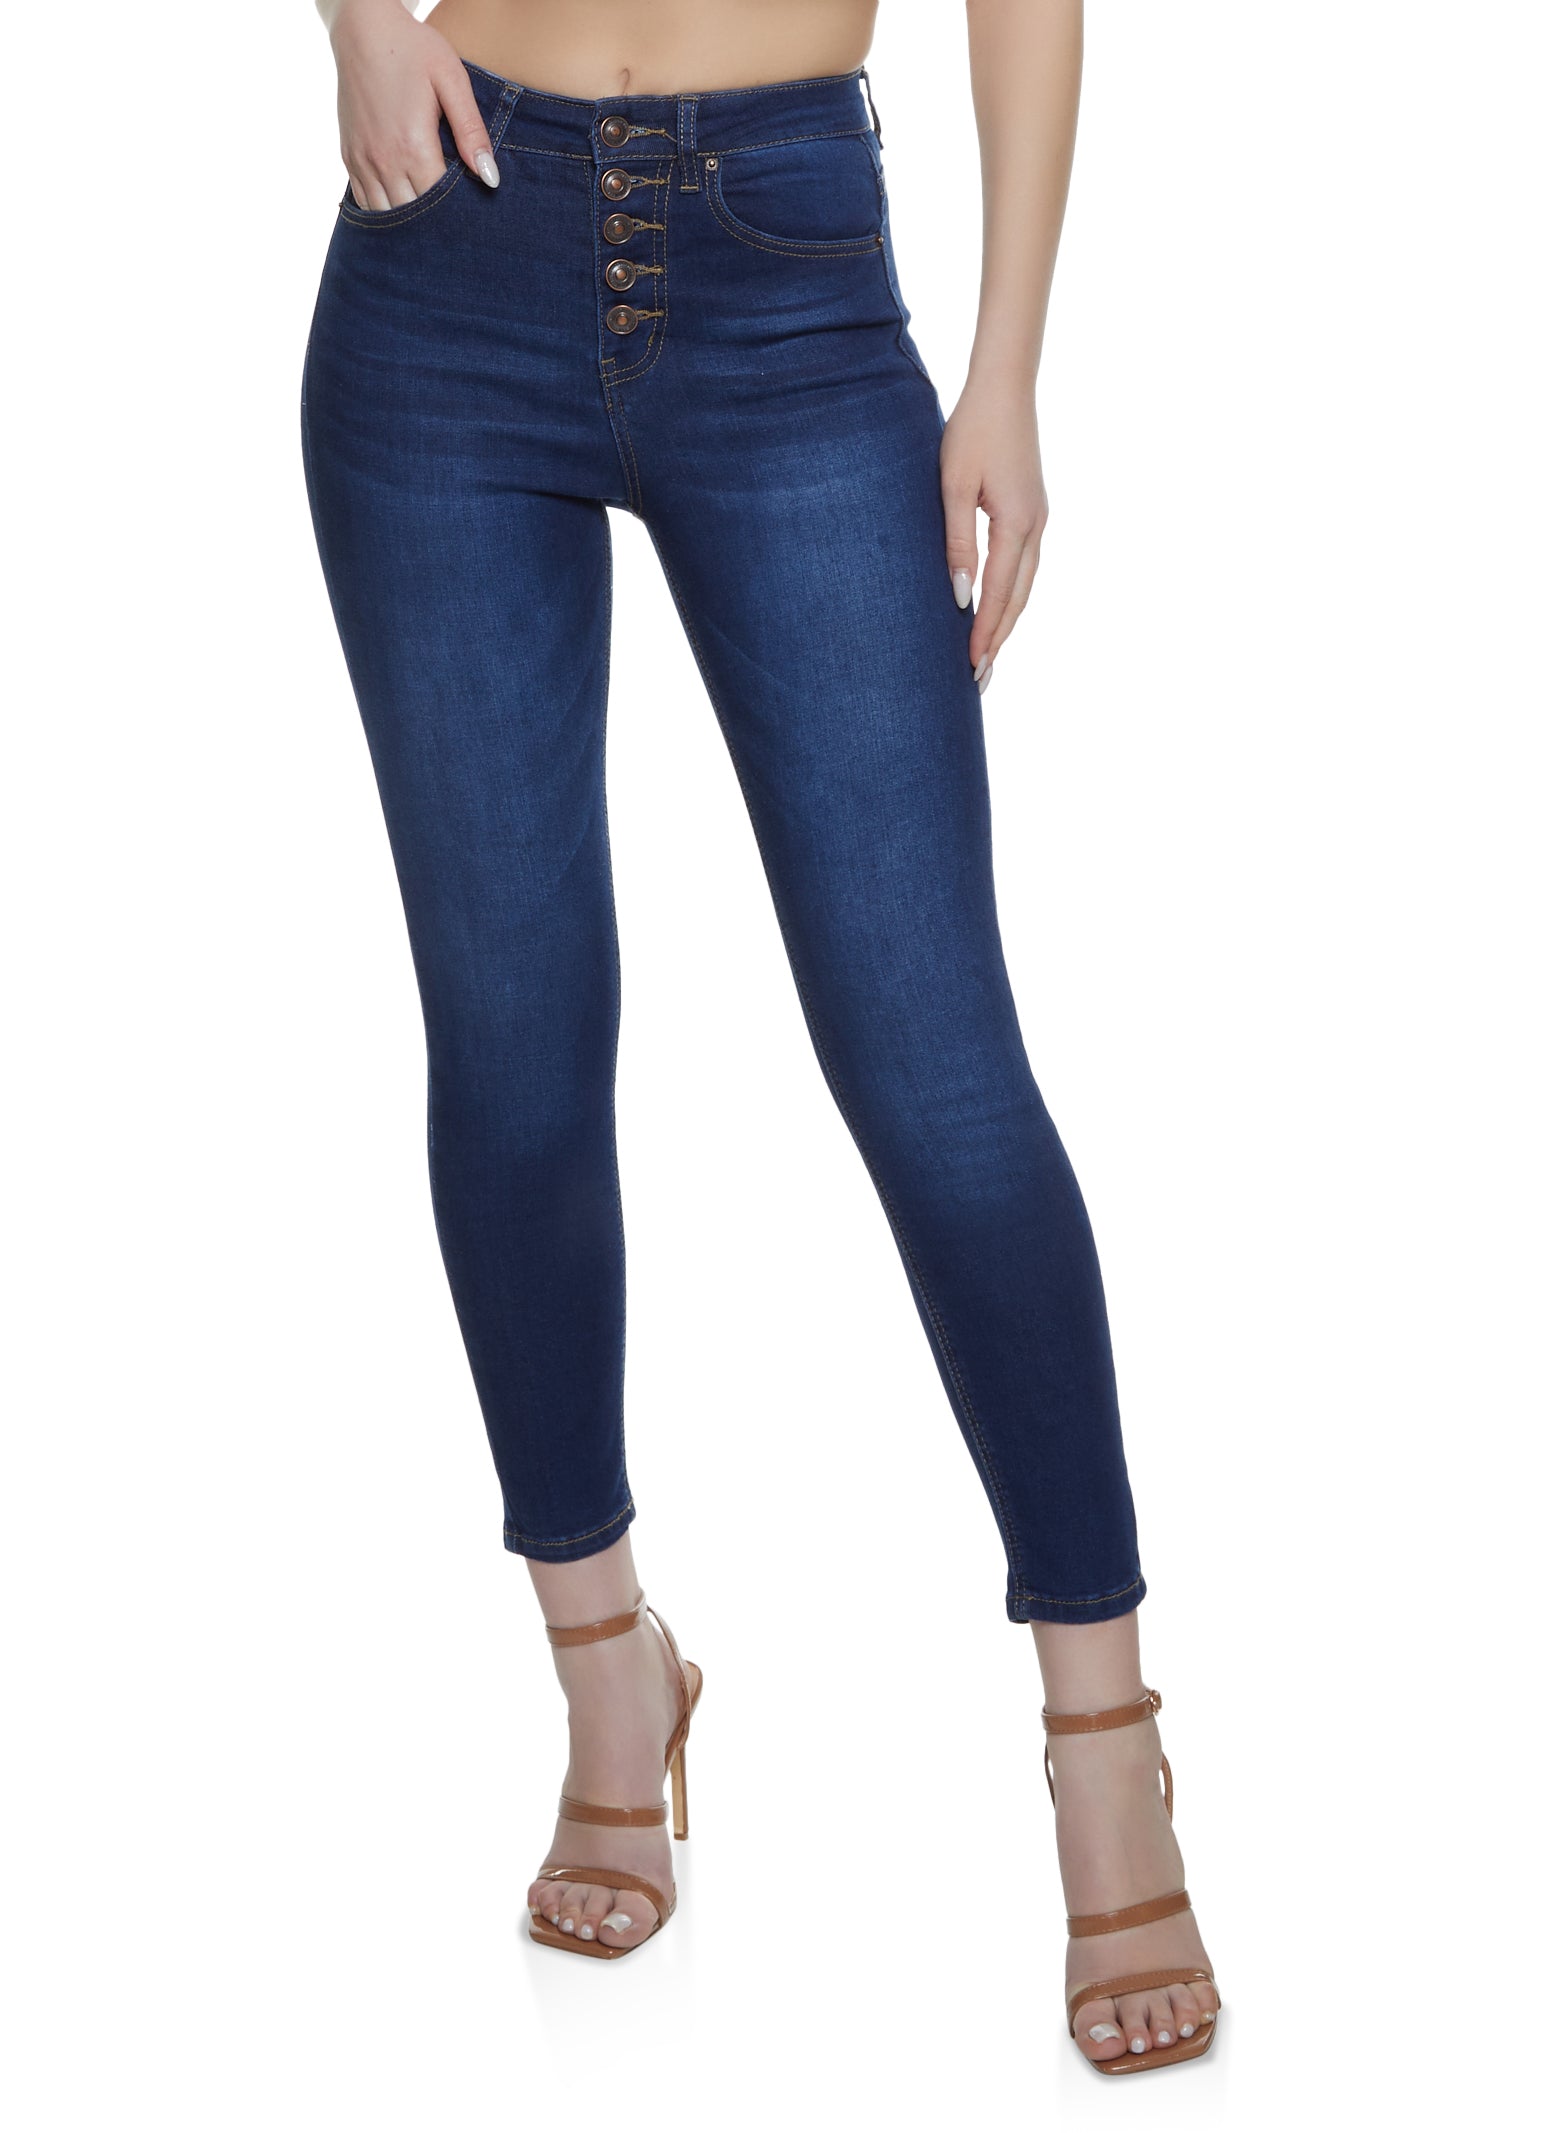 WAX Button Front Skinny Jeans